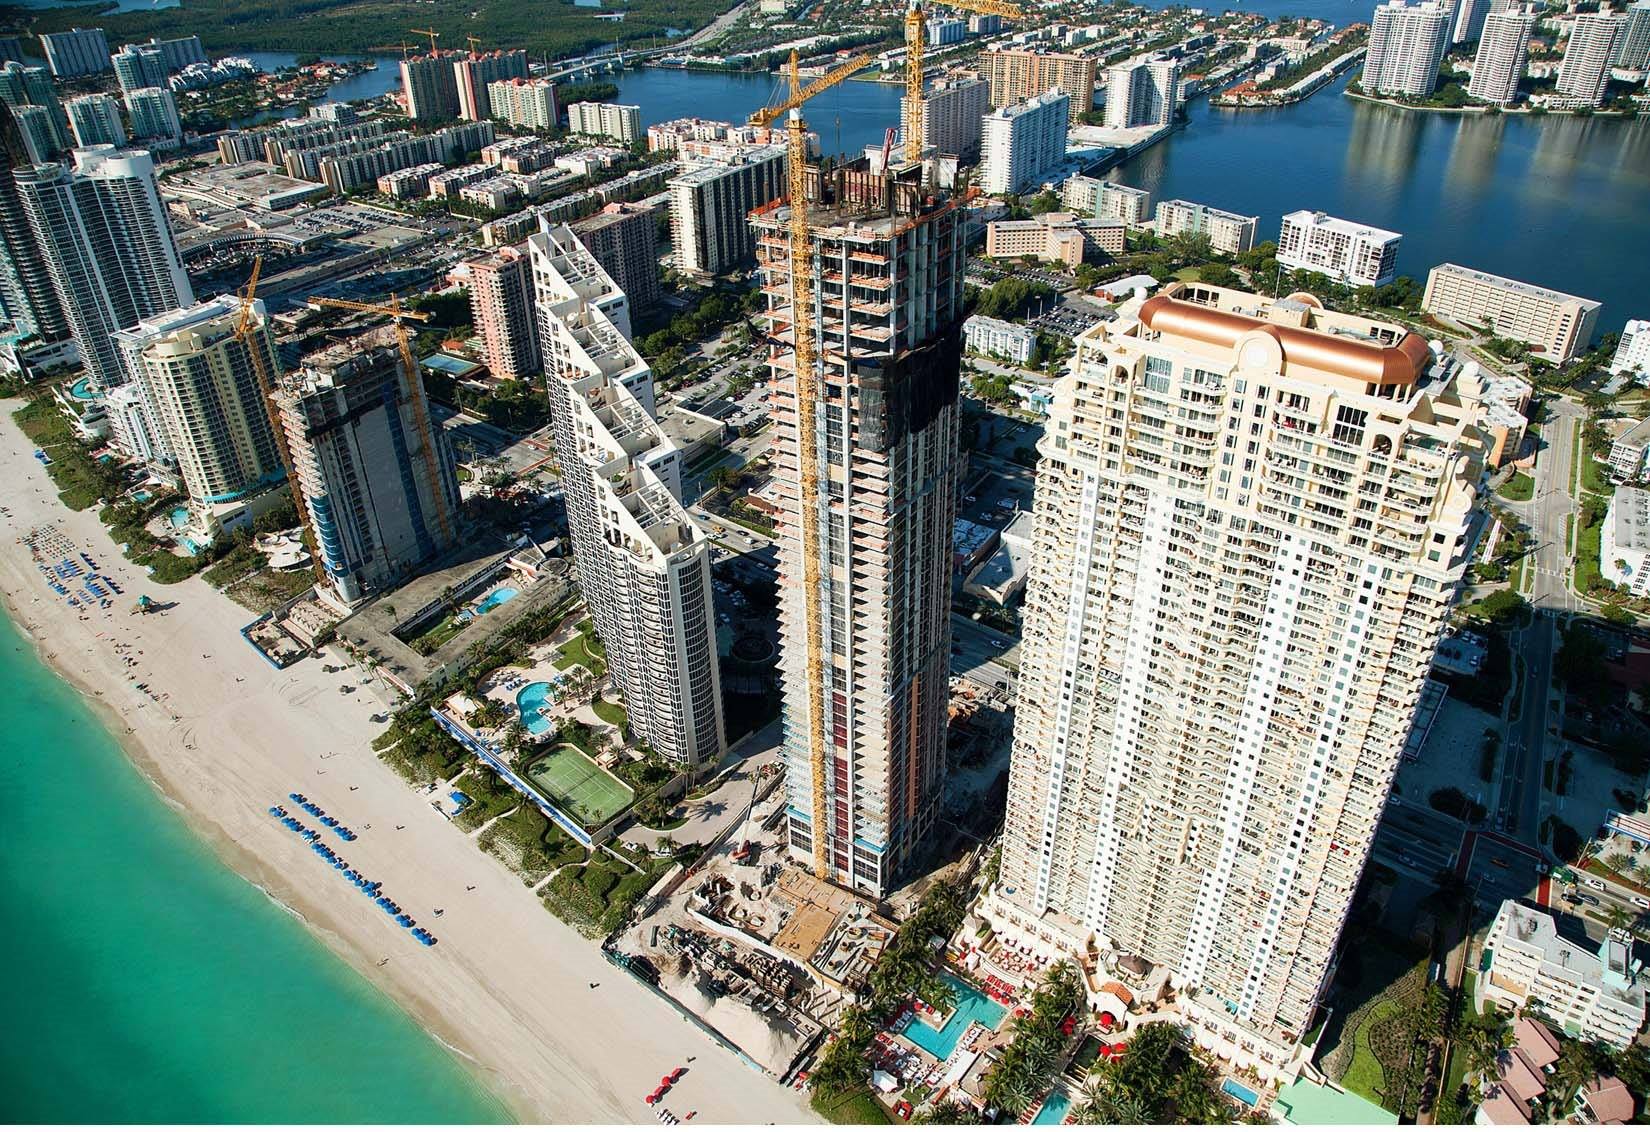 Standing tall in Florida: The Mansions at Aqualina is one of the tallest buildings in Florida. PENETRON ADMIX ensures the below-grade foundation structures of the 46-floor tower are waterproof.